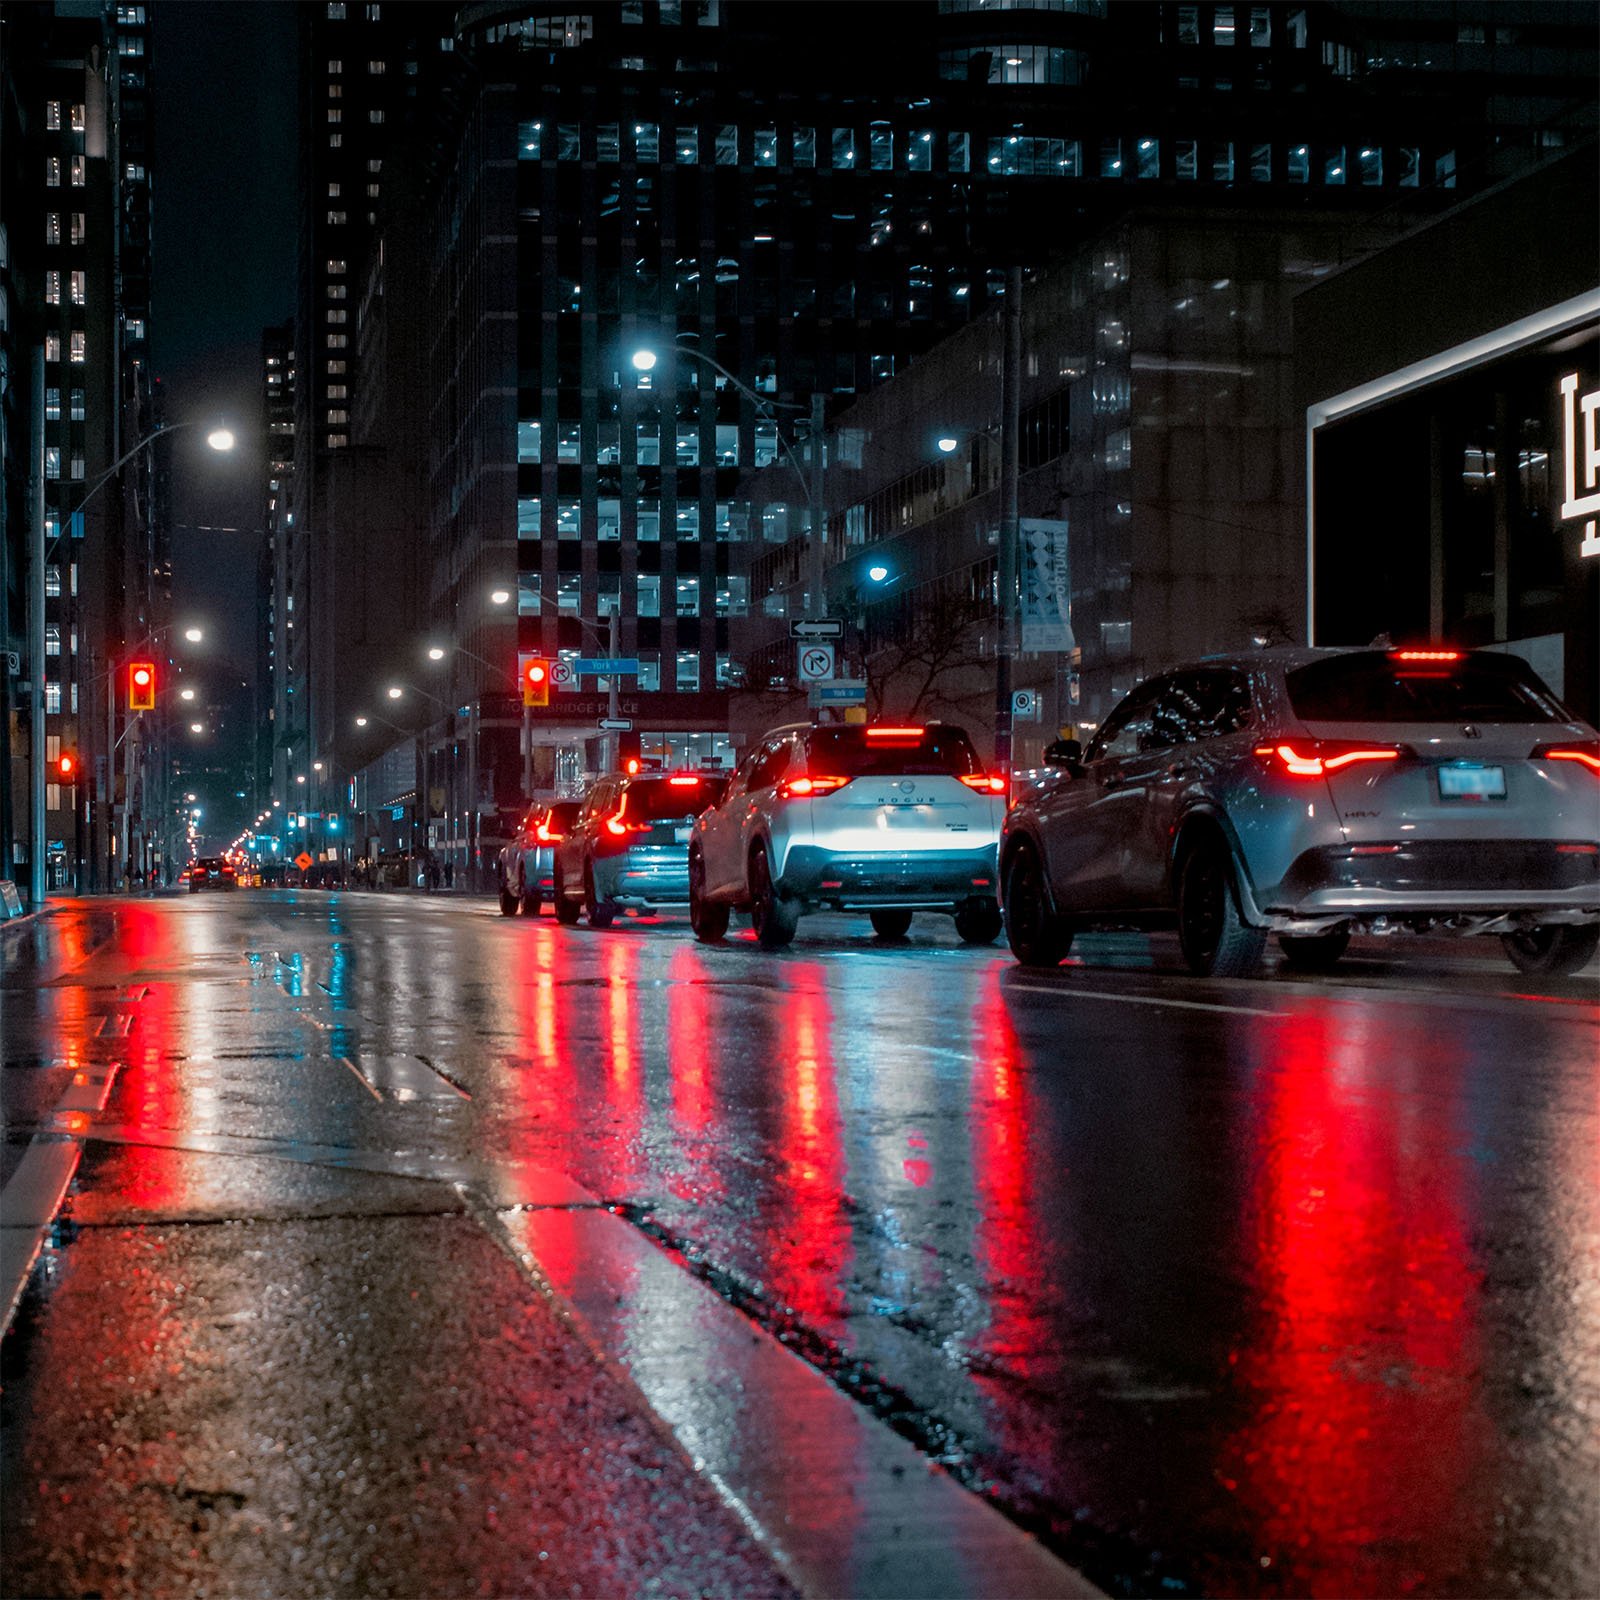 Cars wait at a traffic light on a wet city street at night, with reflections of red and white lights on the pavement. Tall buildings with illuminated windows line the street, contributing to the urban ambiance.